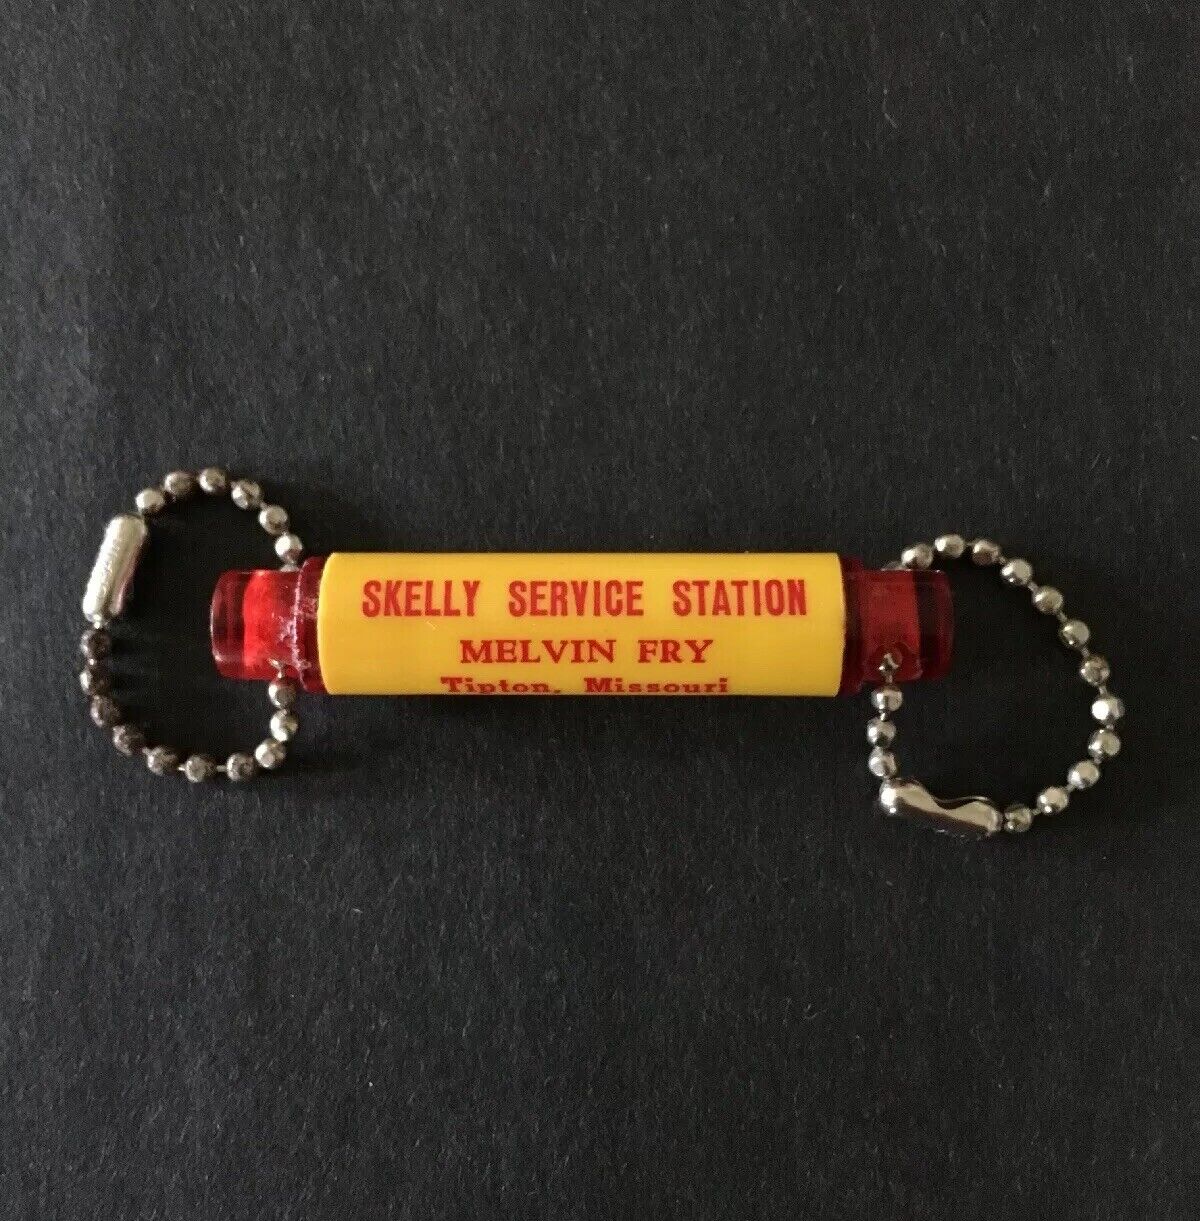 Vintage Keychain SKELLY SERVICE STATION Double Ring Fob TIPTON, MO Melvin Fry